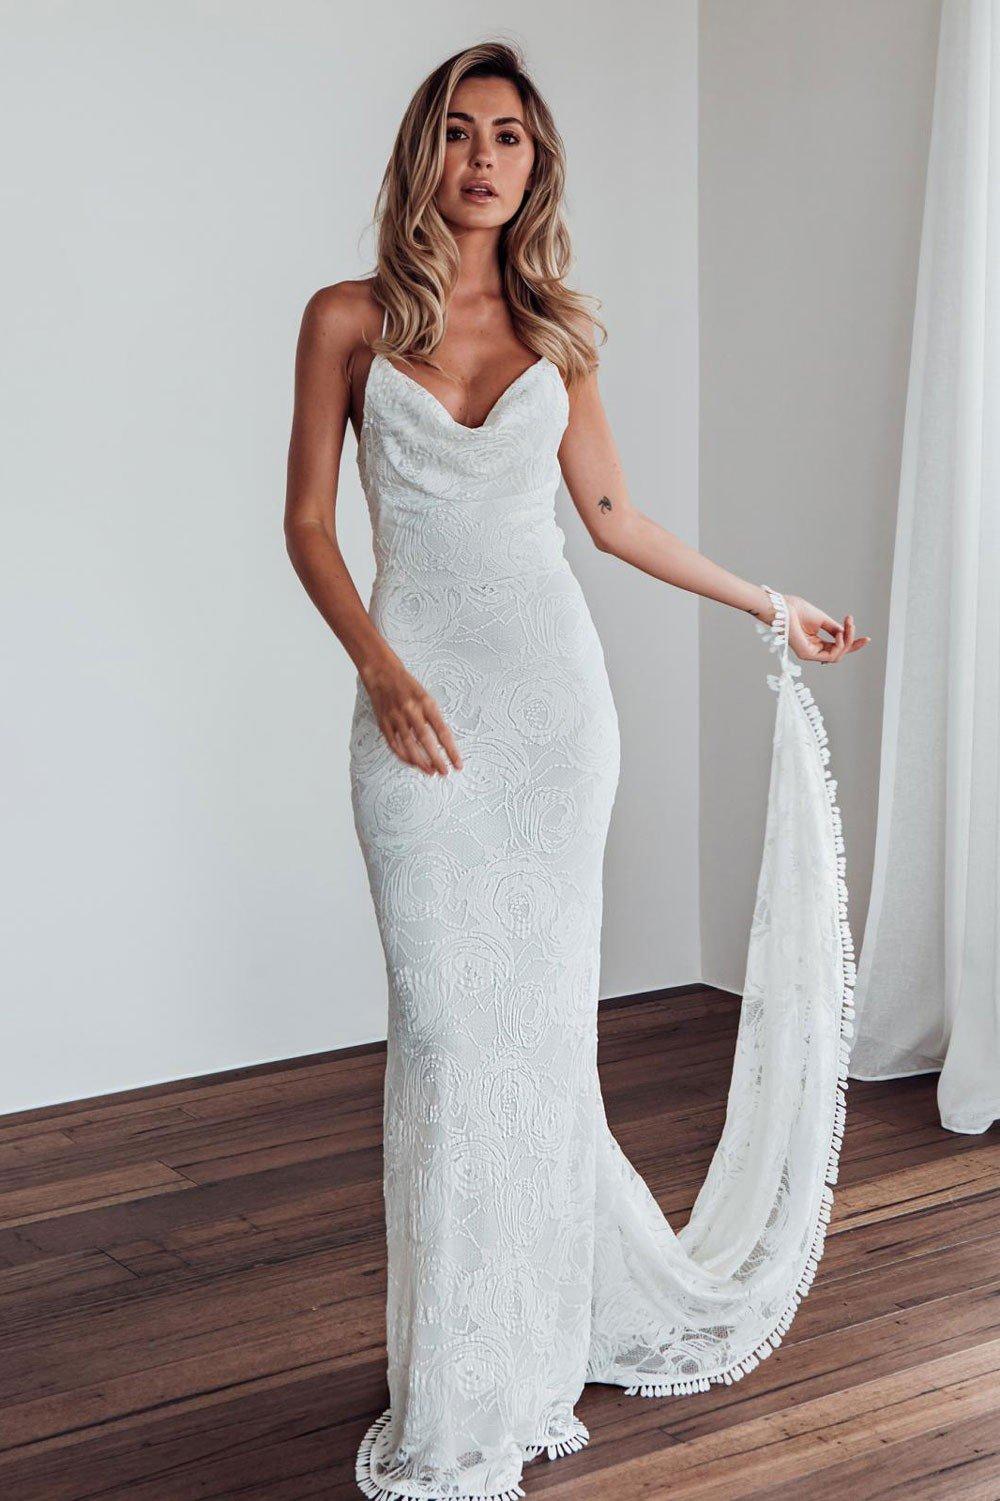 Lace Wedding Dresses: 49 Beautiful Picks to Suit All Brides